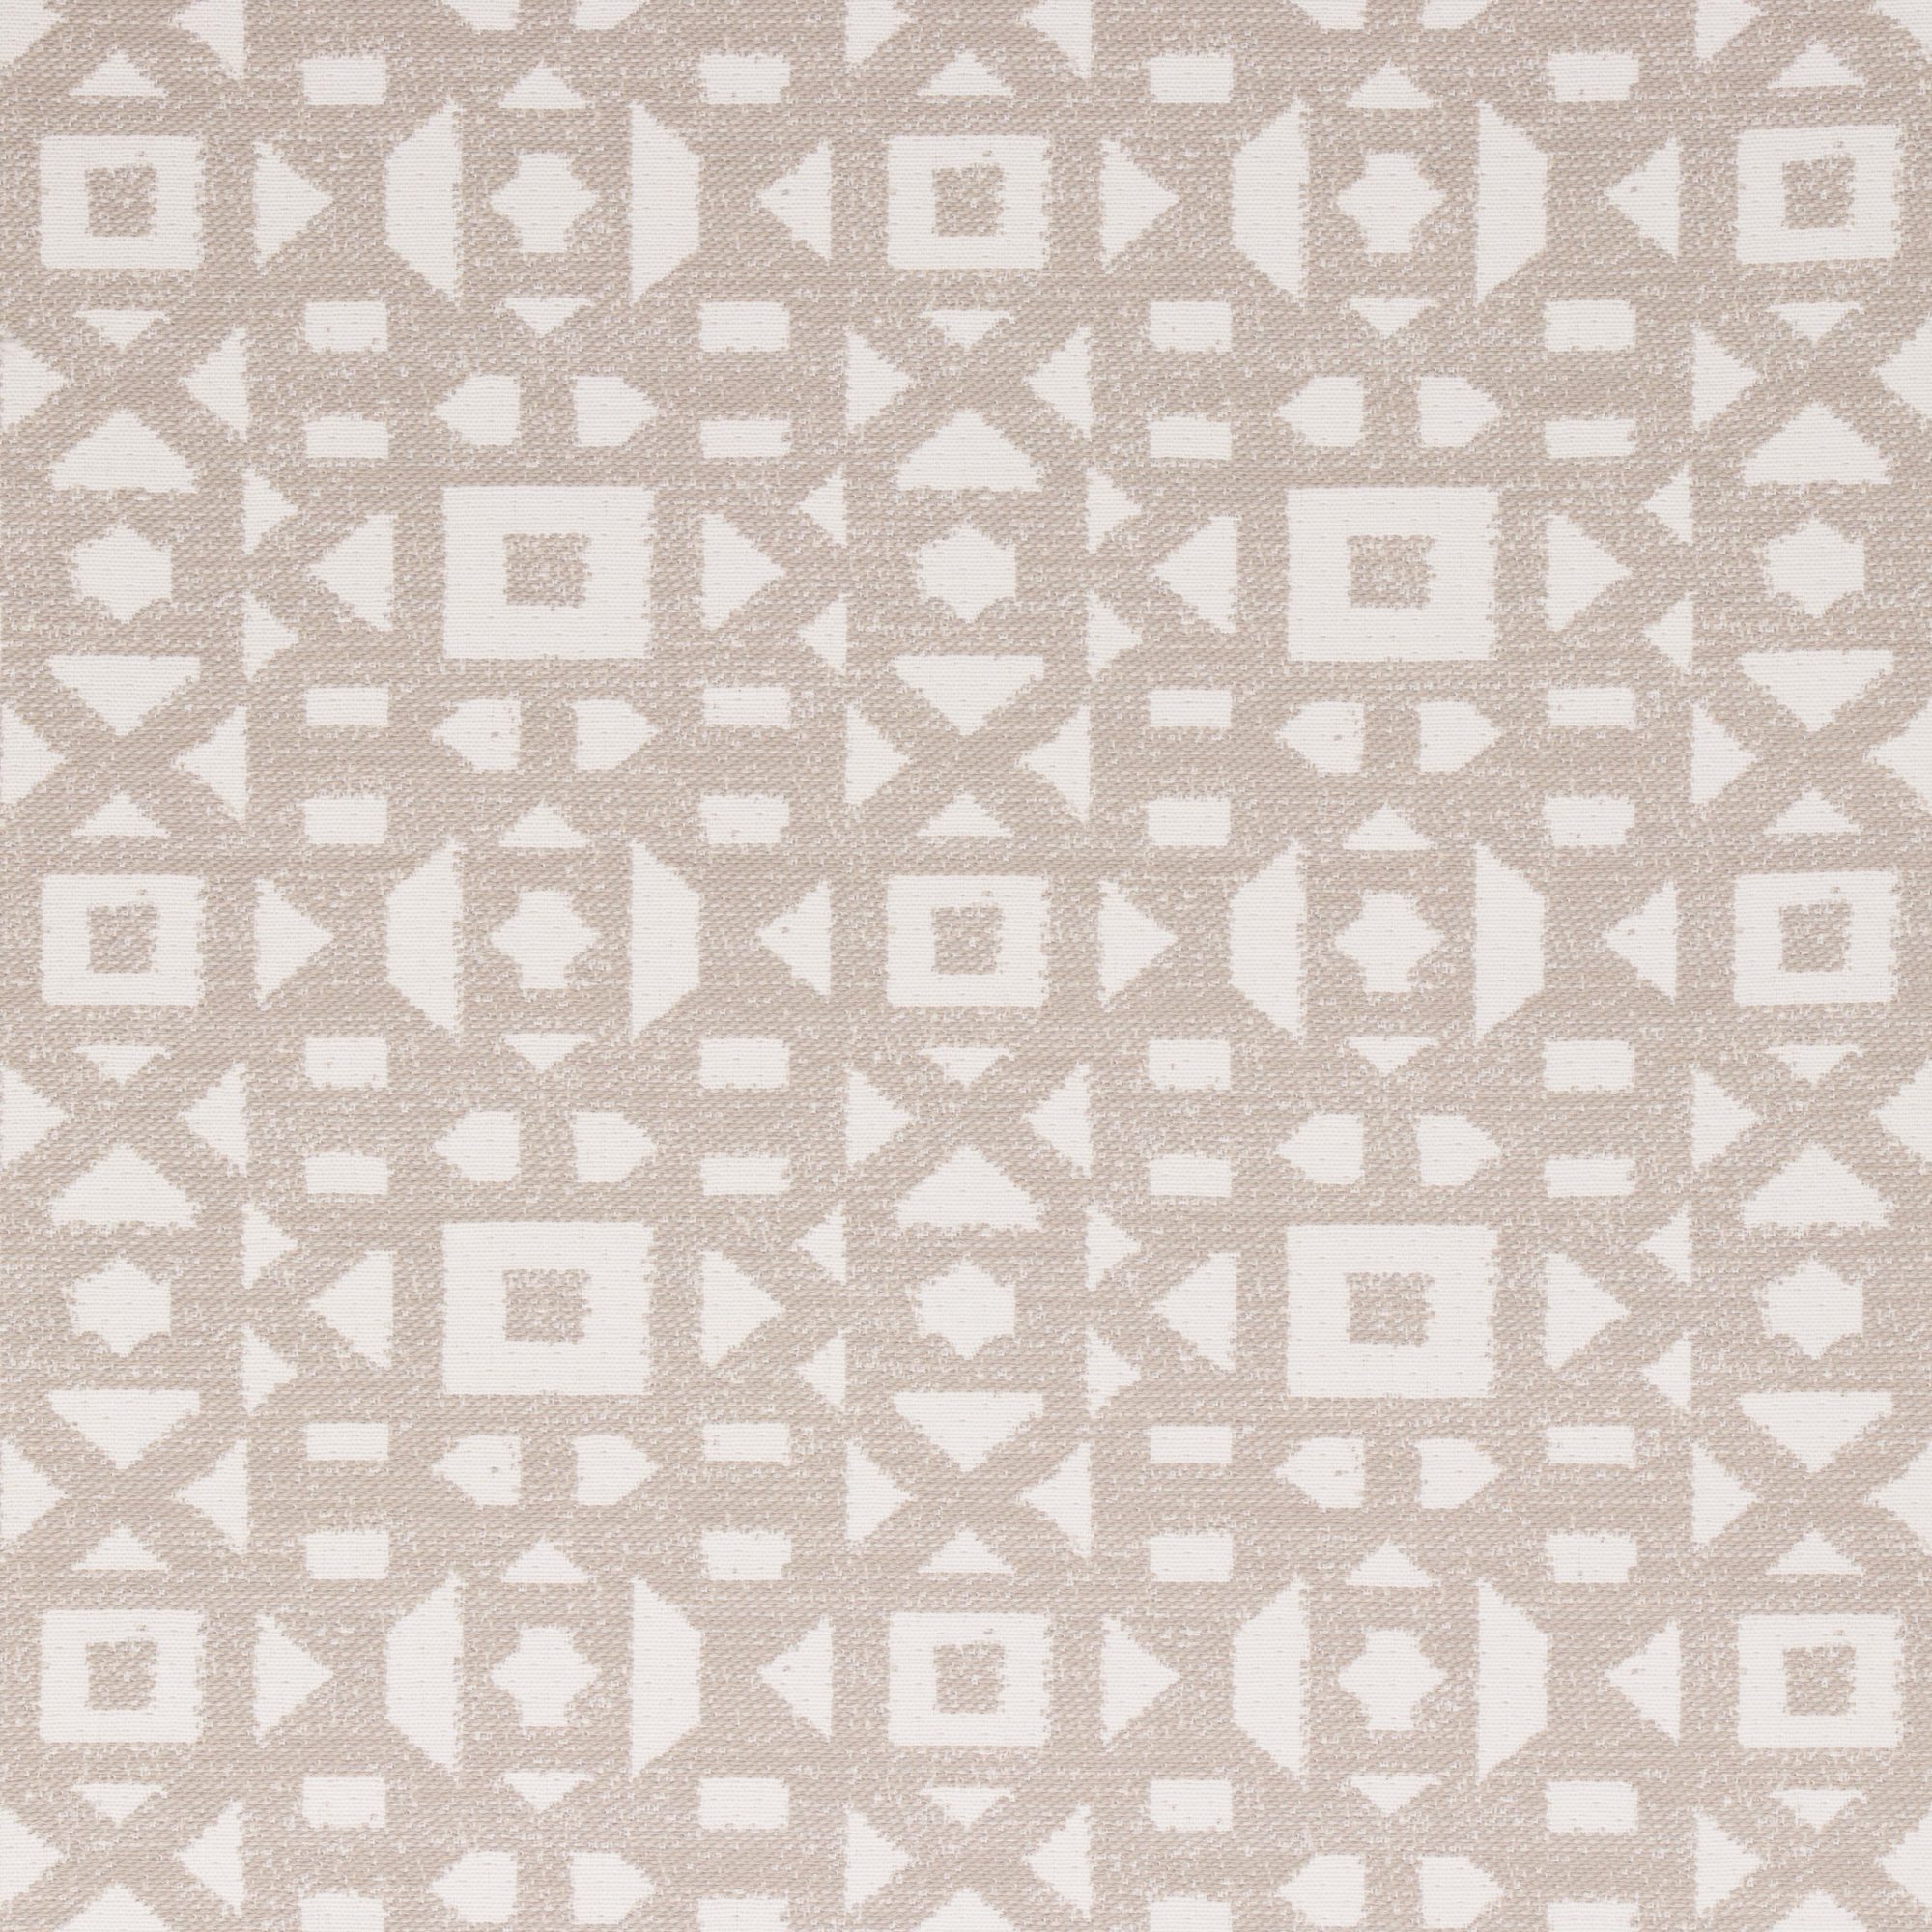 Bella Dura and Bella Dura Home cut yardage fabric in the pattern Galloway and color Dove.